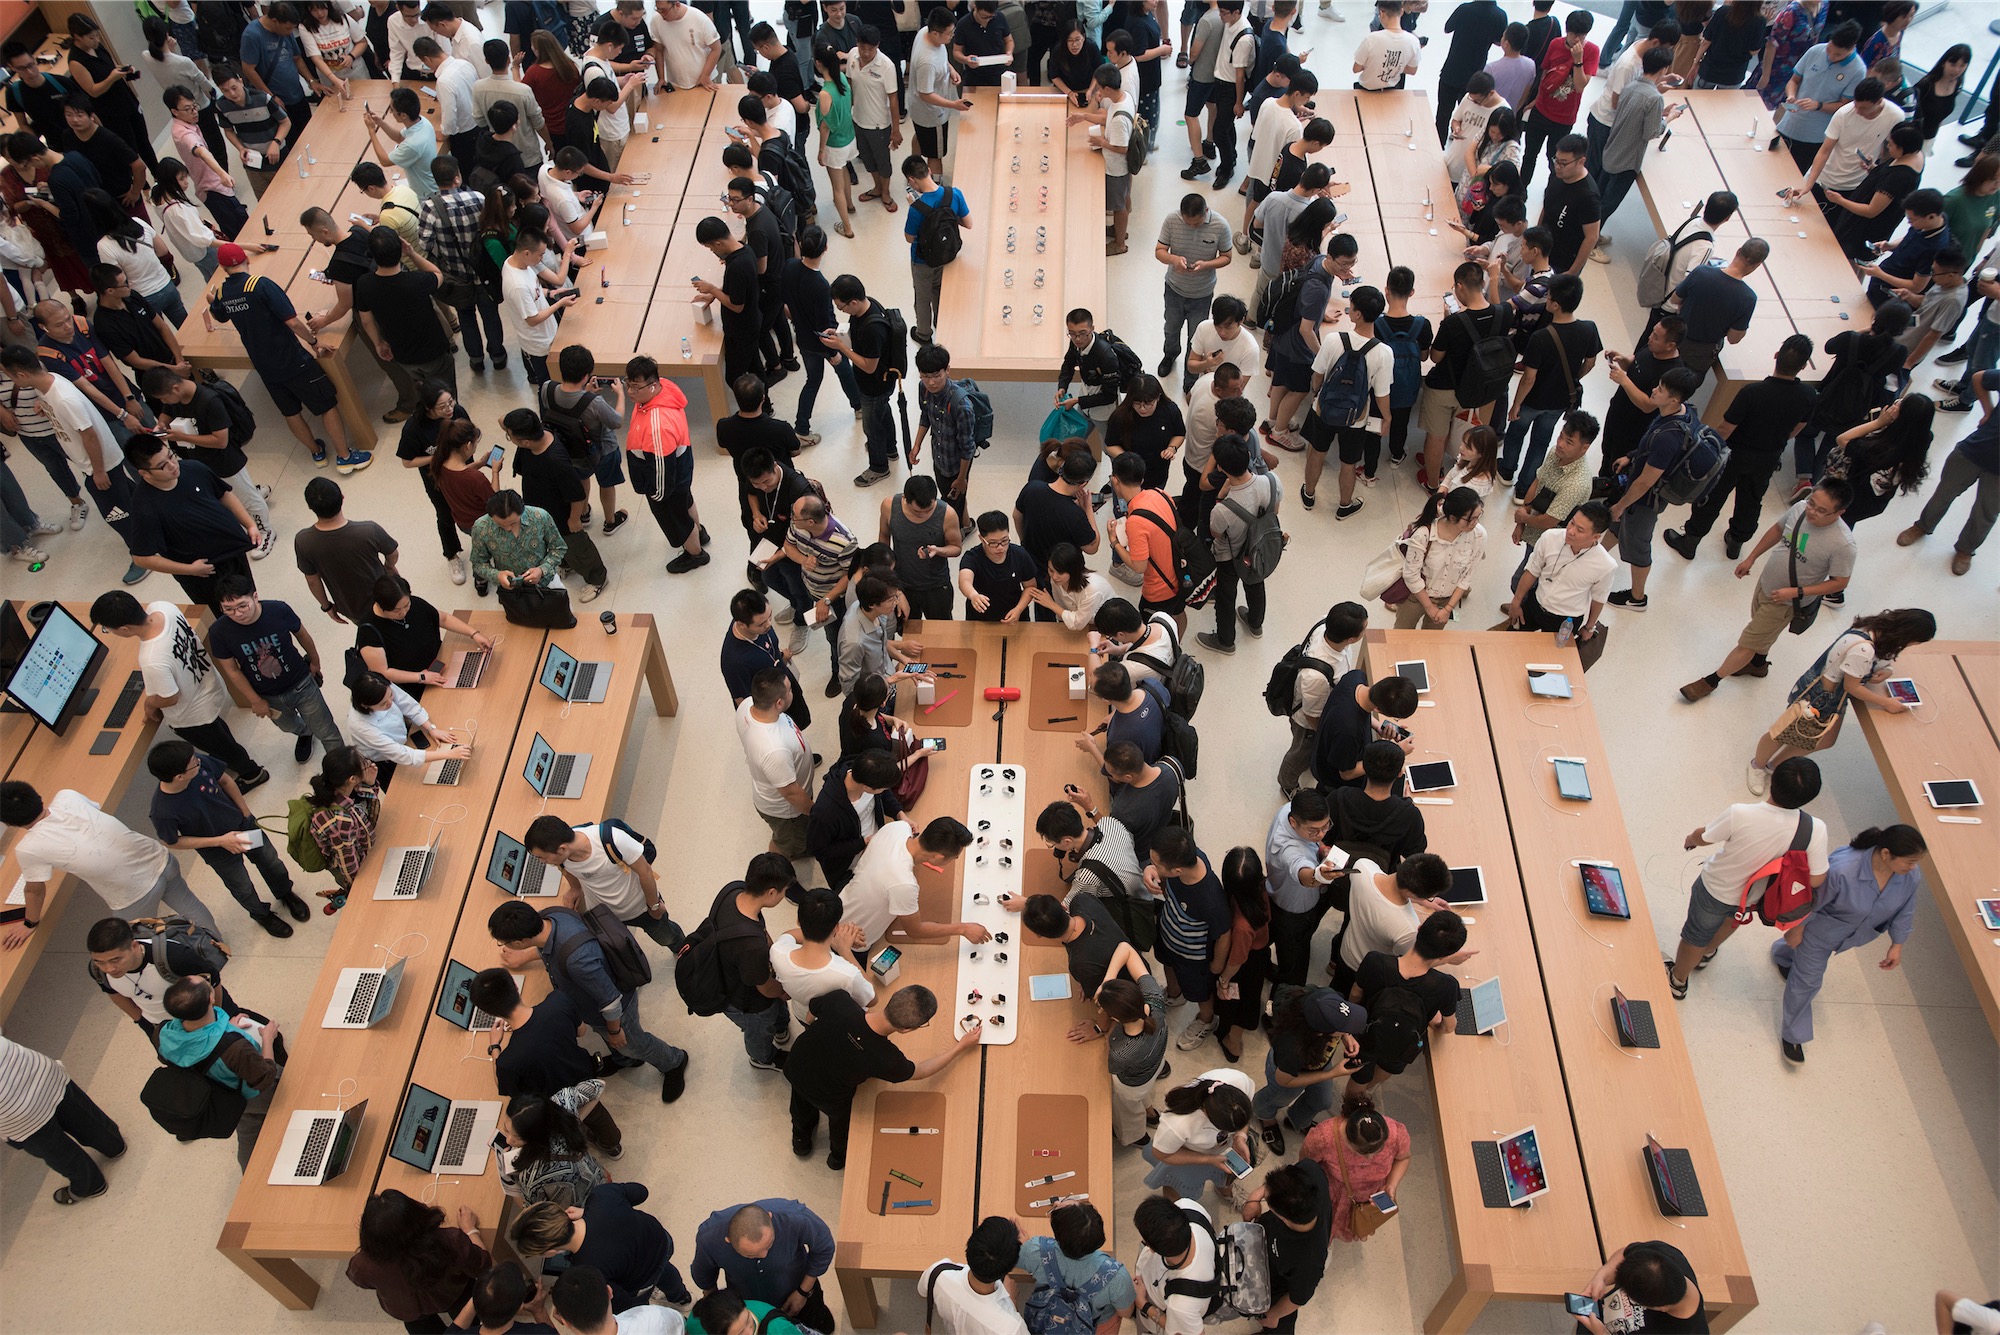 Launch of new iPhones and Apple Watch in Apple stores